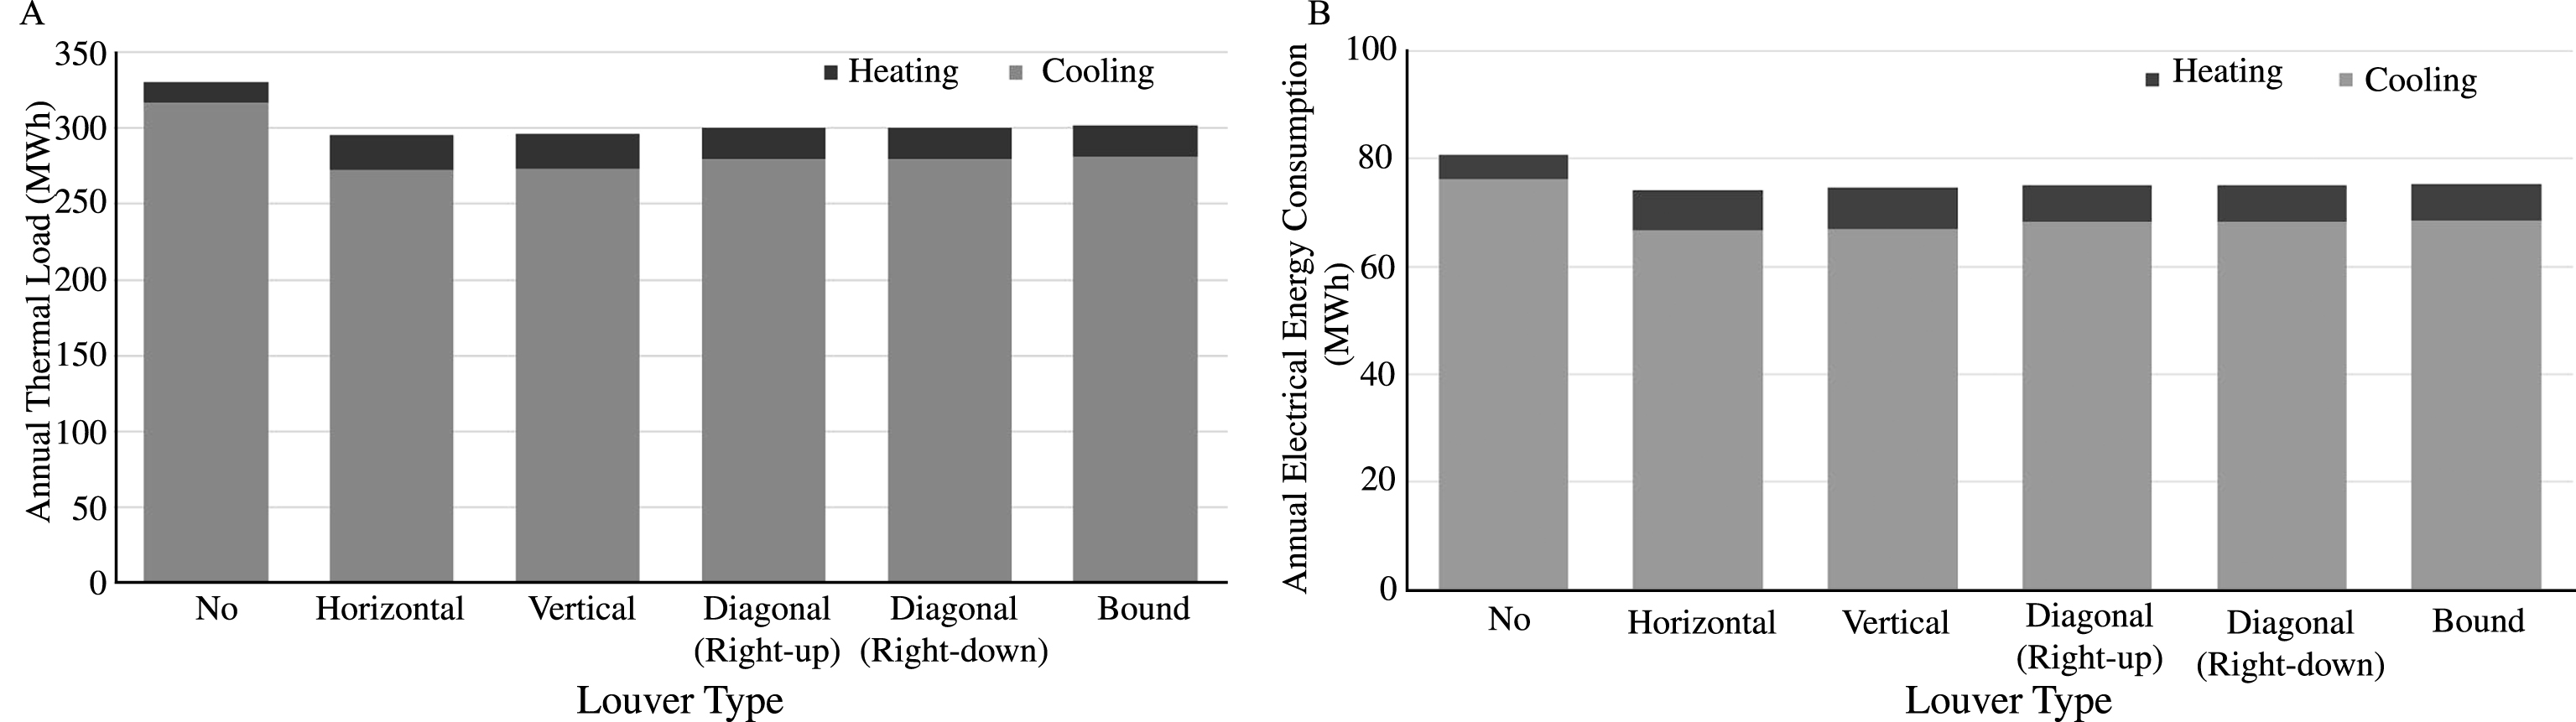 A. Annual thermal load (South), B. Annual electrical energy consumption (South).